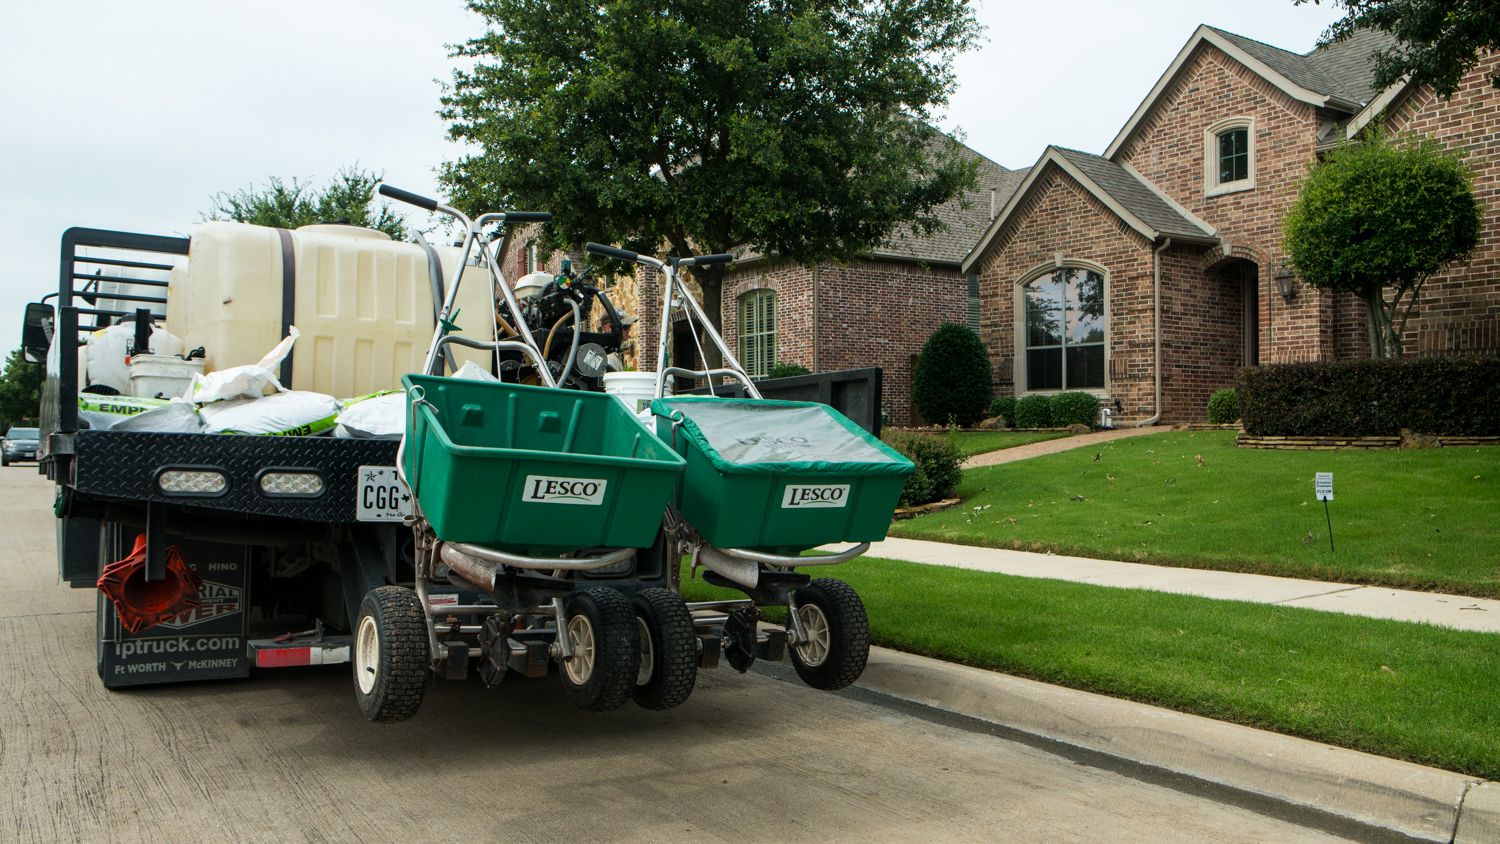 Professional lawn care truck and equipment